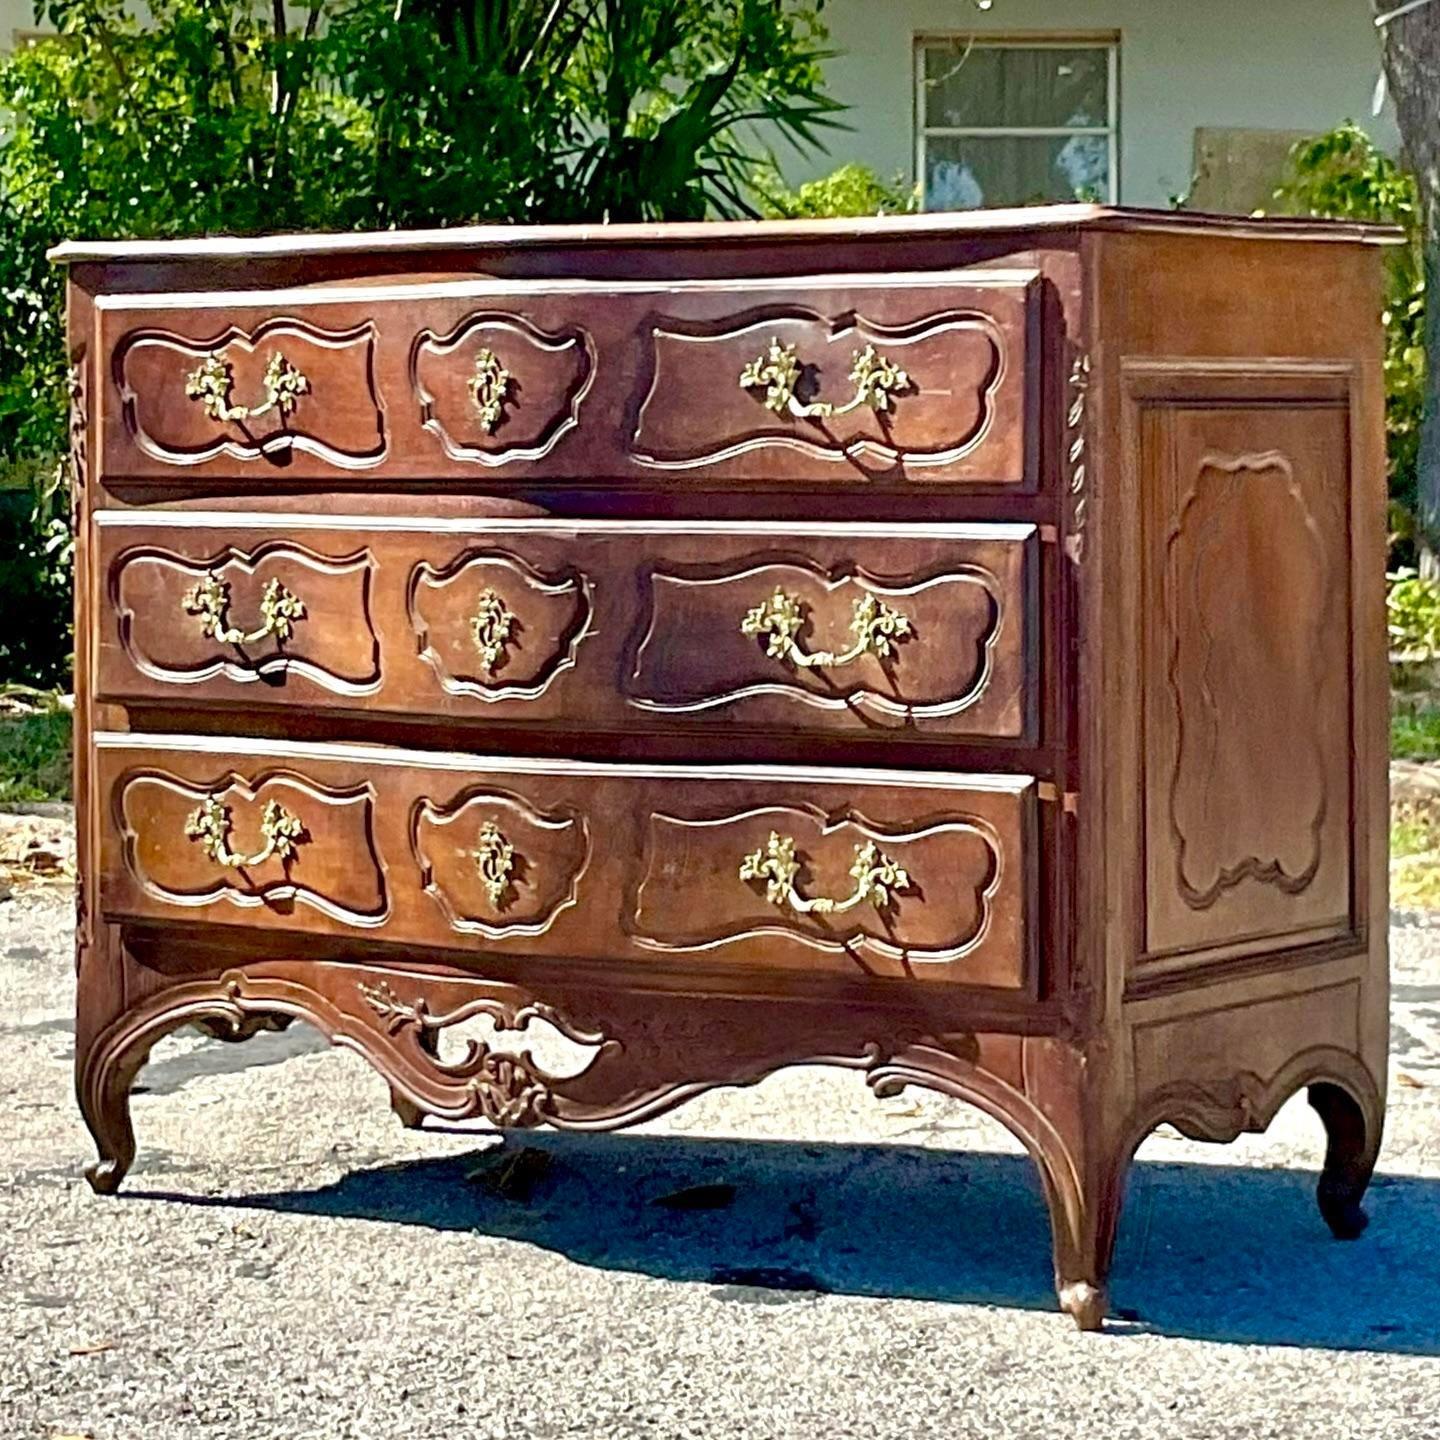 A stunning vintage Regency chest of drawers. A beautifully carved heavy Walnut cabinet with gorgeous brass hardware. Lots of great patina from time. Acquired from a Palm Beach estate.